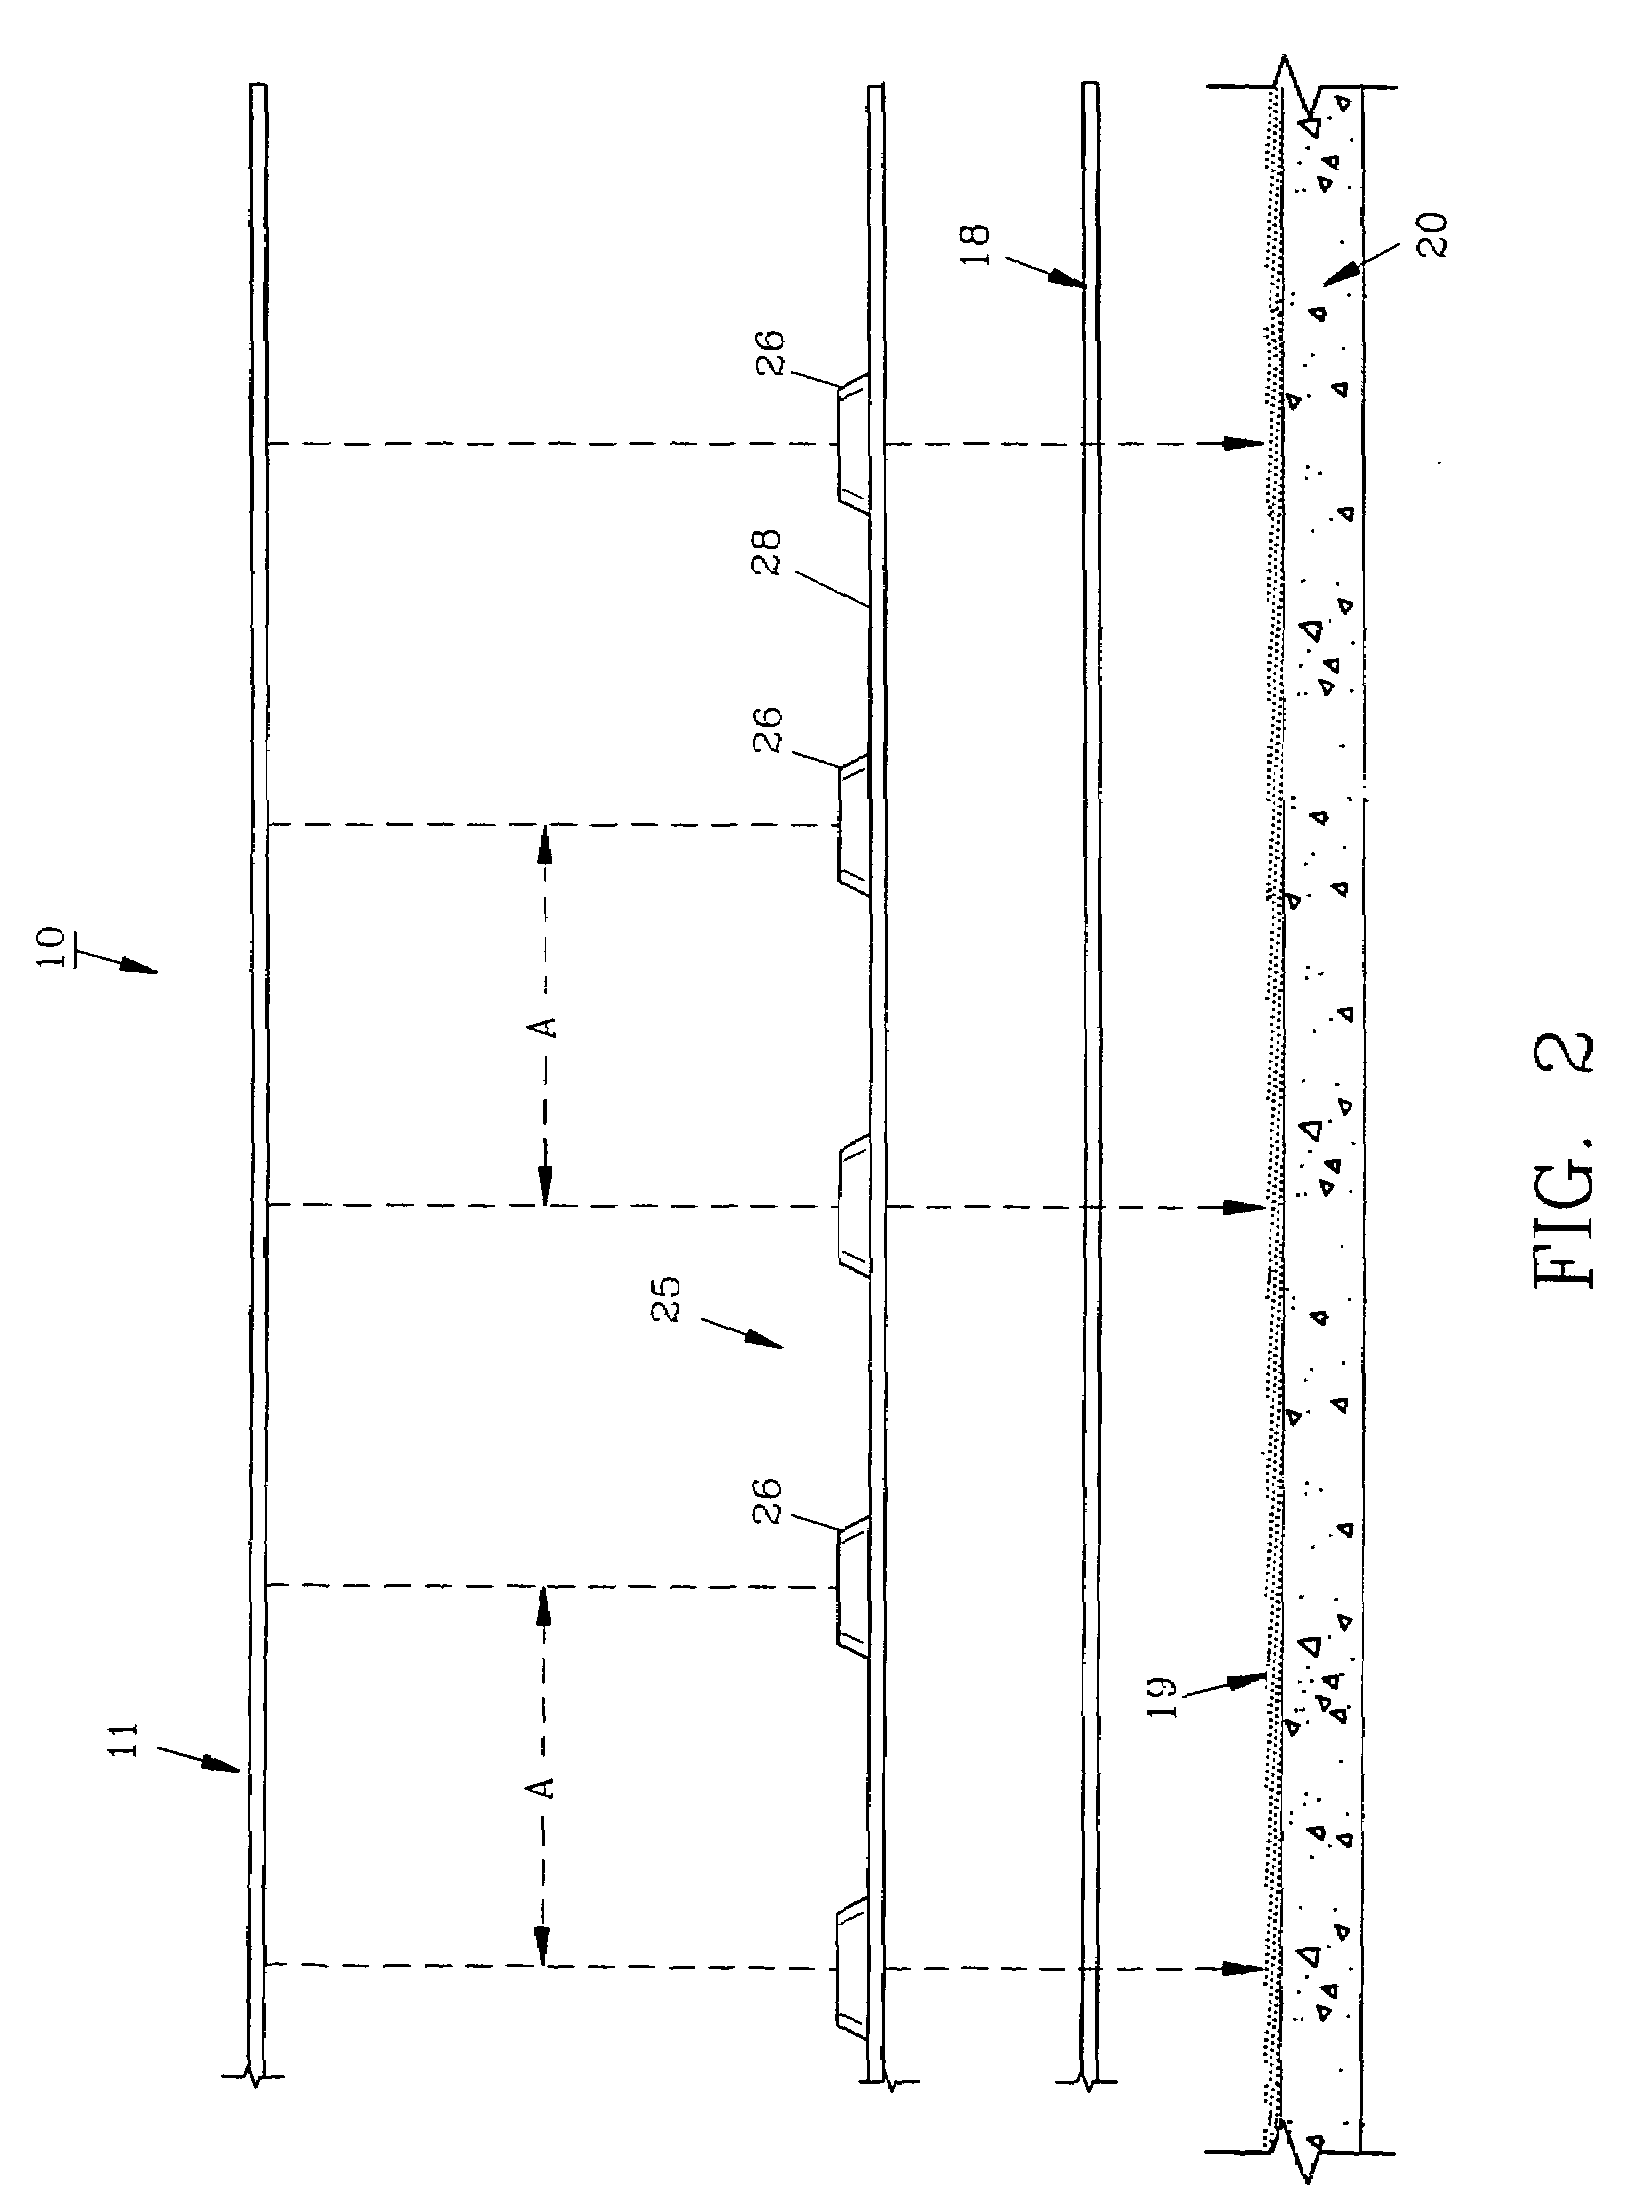 Preformed pavement warning assembly and method